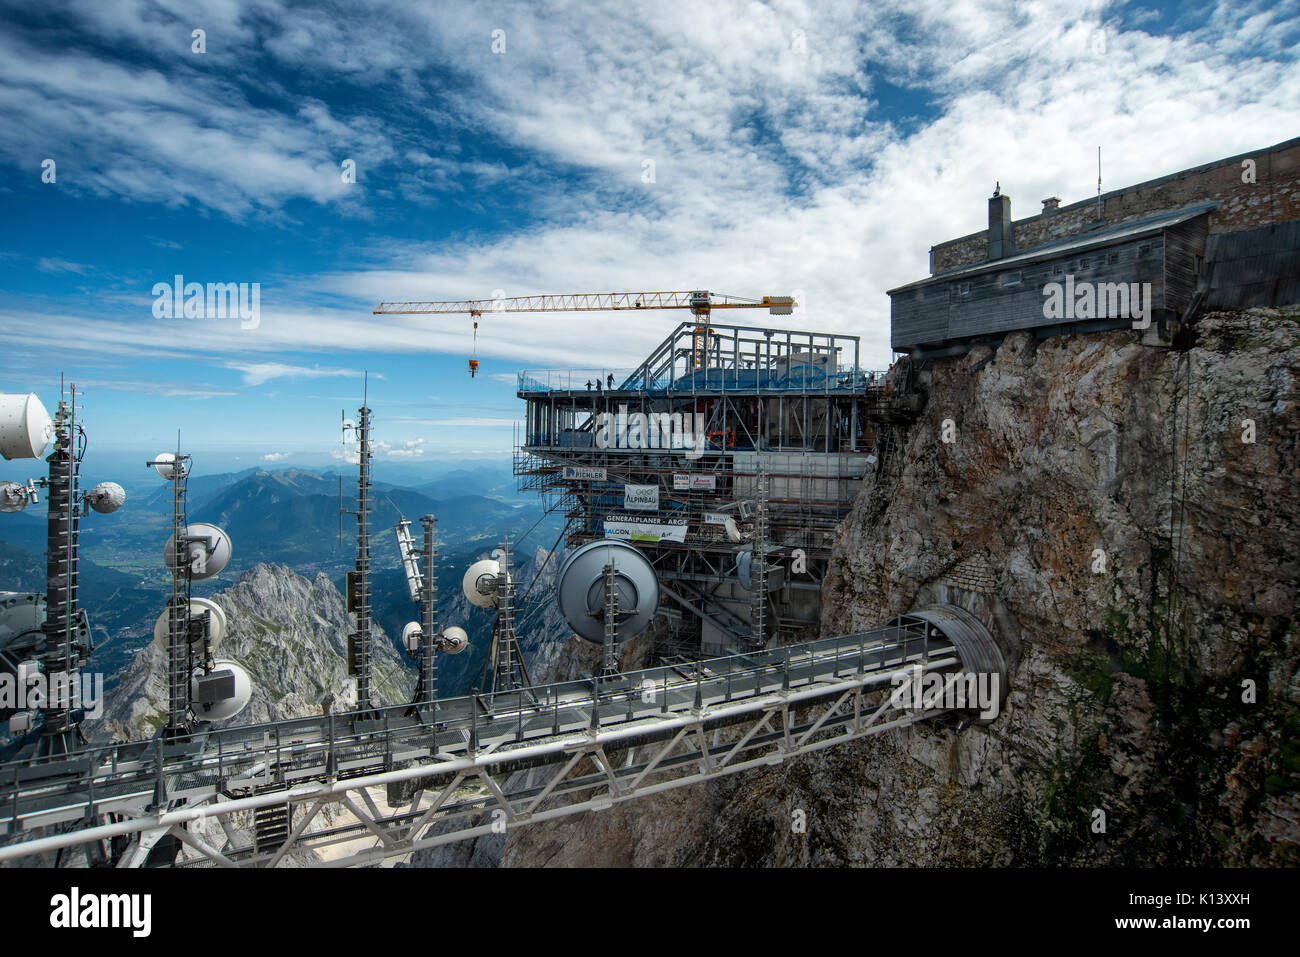 The construction of the new Seilbahn Cable Car on the summit of the Zugspitze mountain on the German and Austrian border. Stock Photo